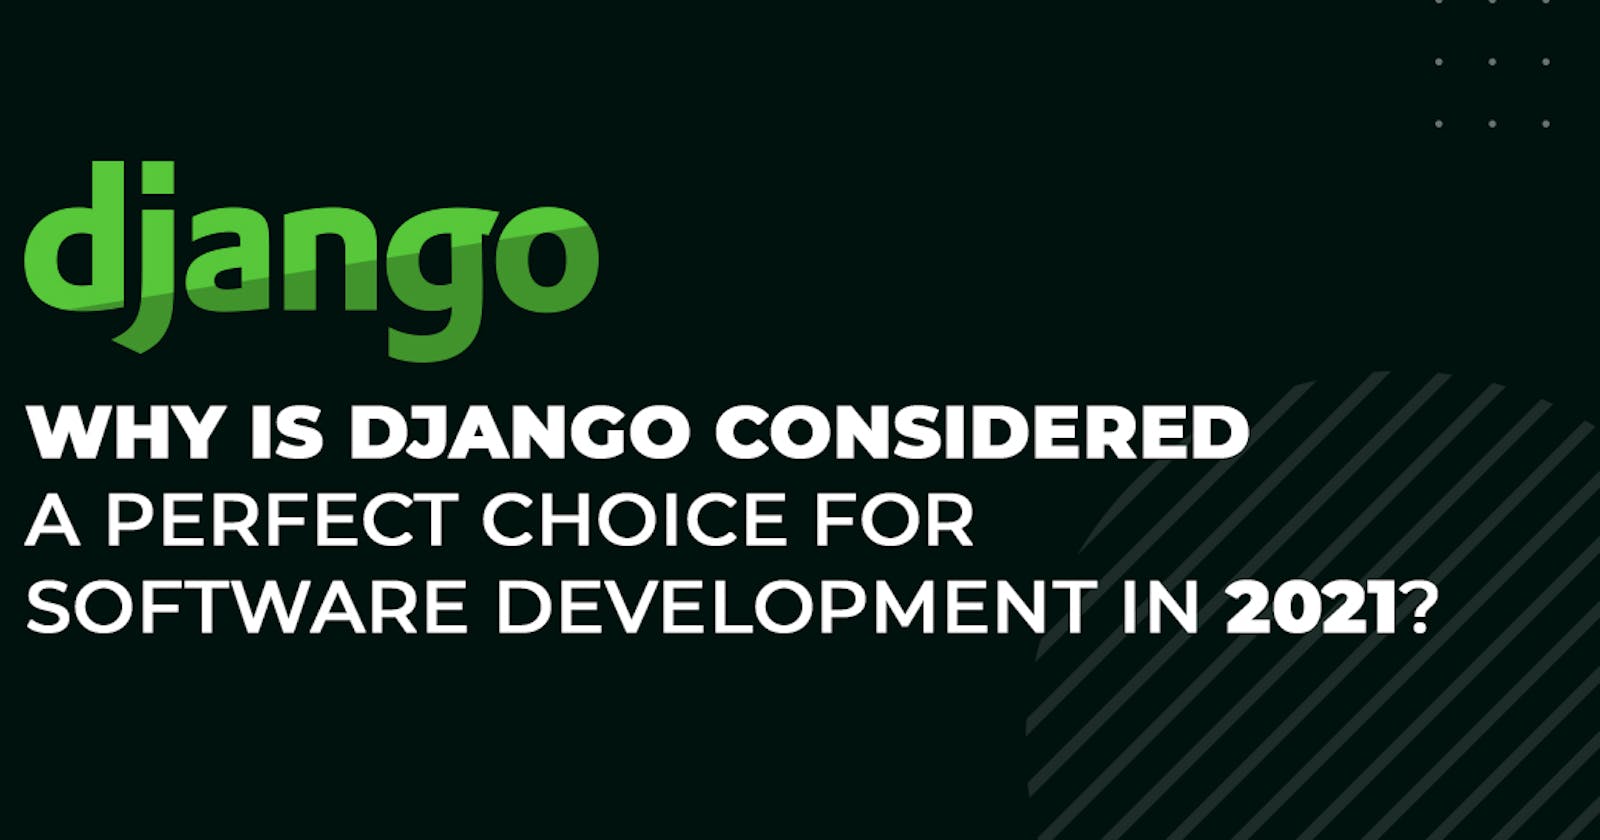 Why Is Django Considered A Perfect Choice For Software Development In 2021?